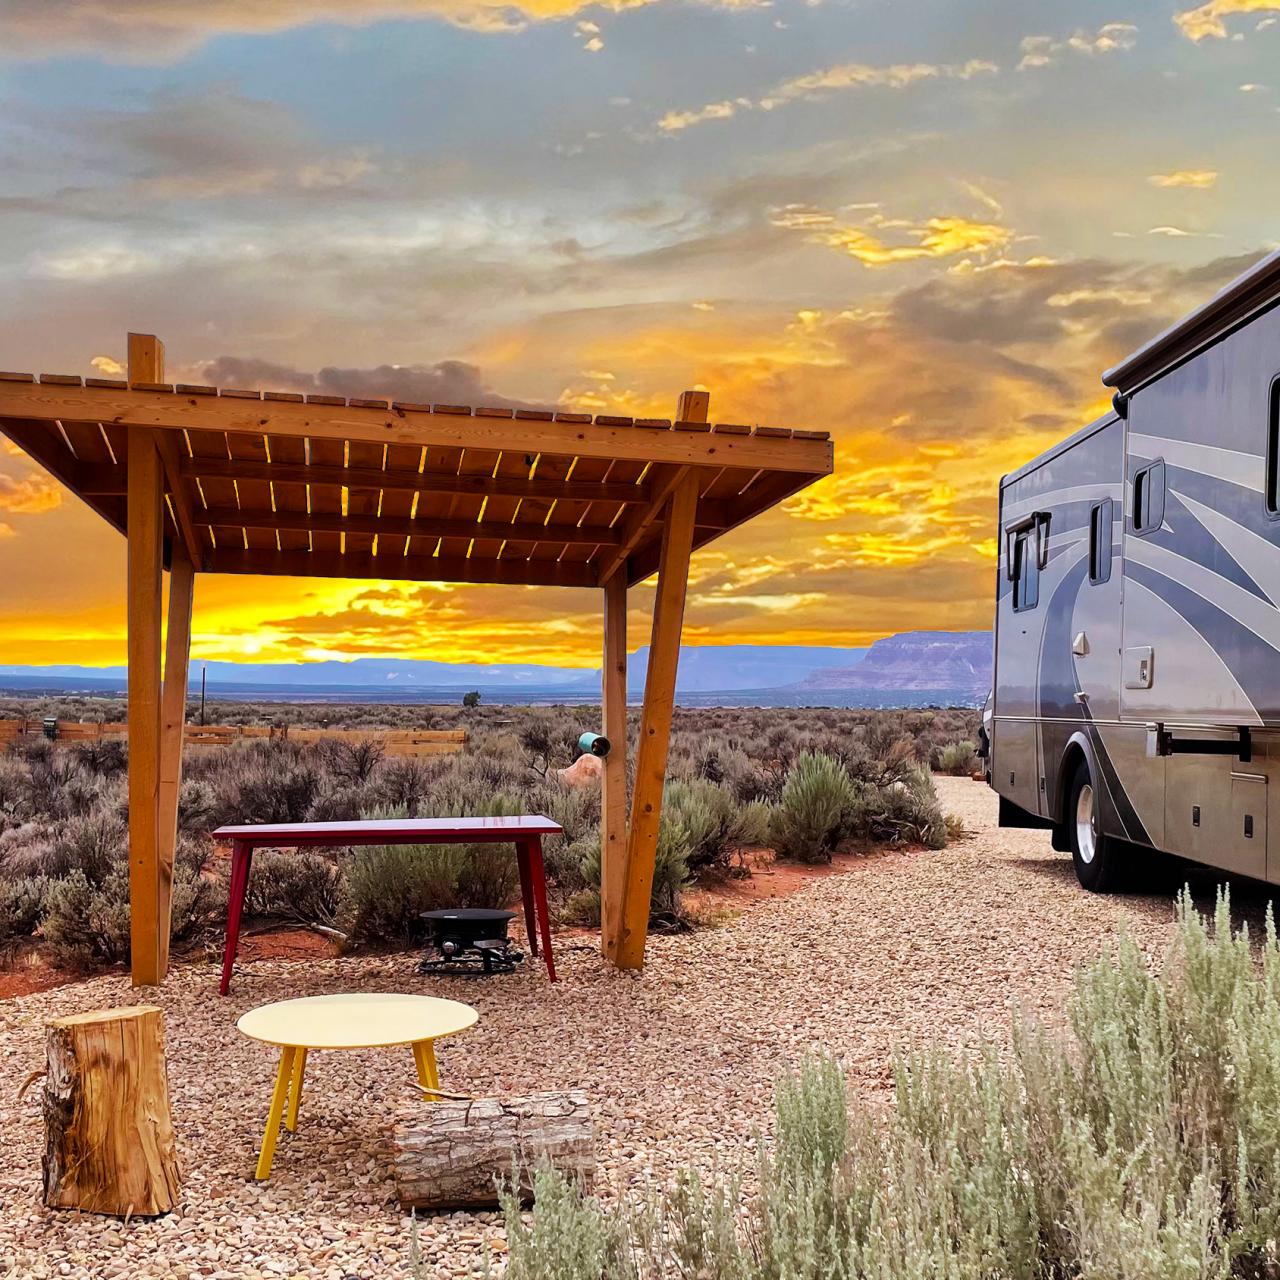 Outdoor Hospitality, Wi-Fi for Campgrounds and RV Parks